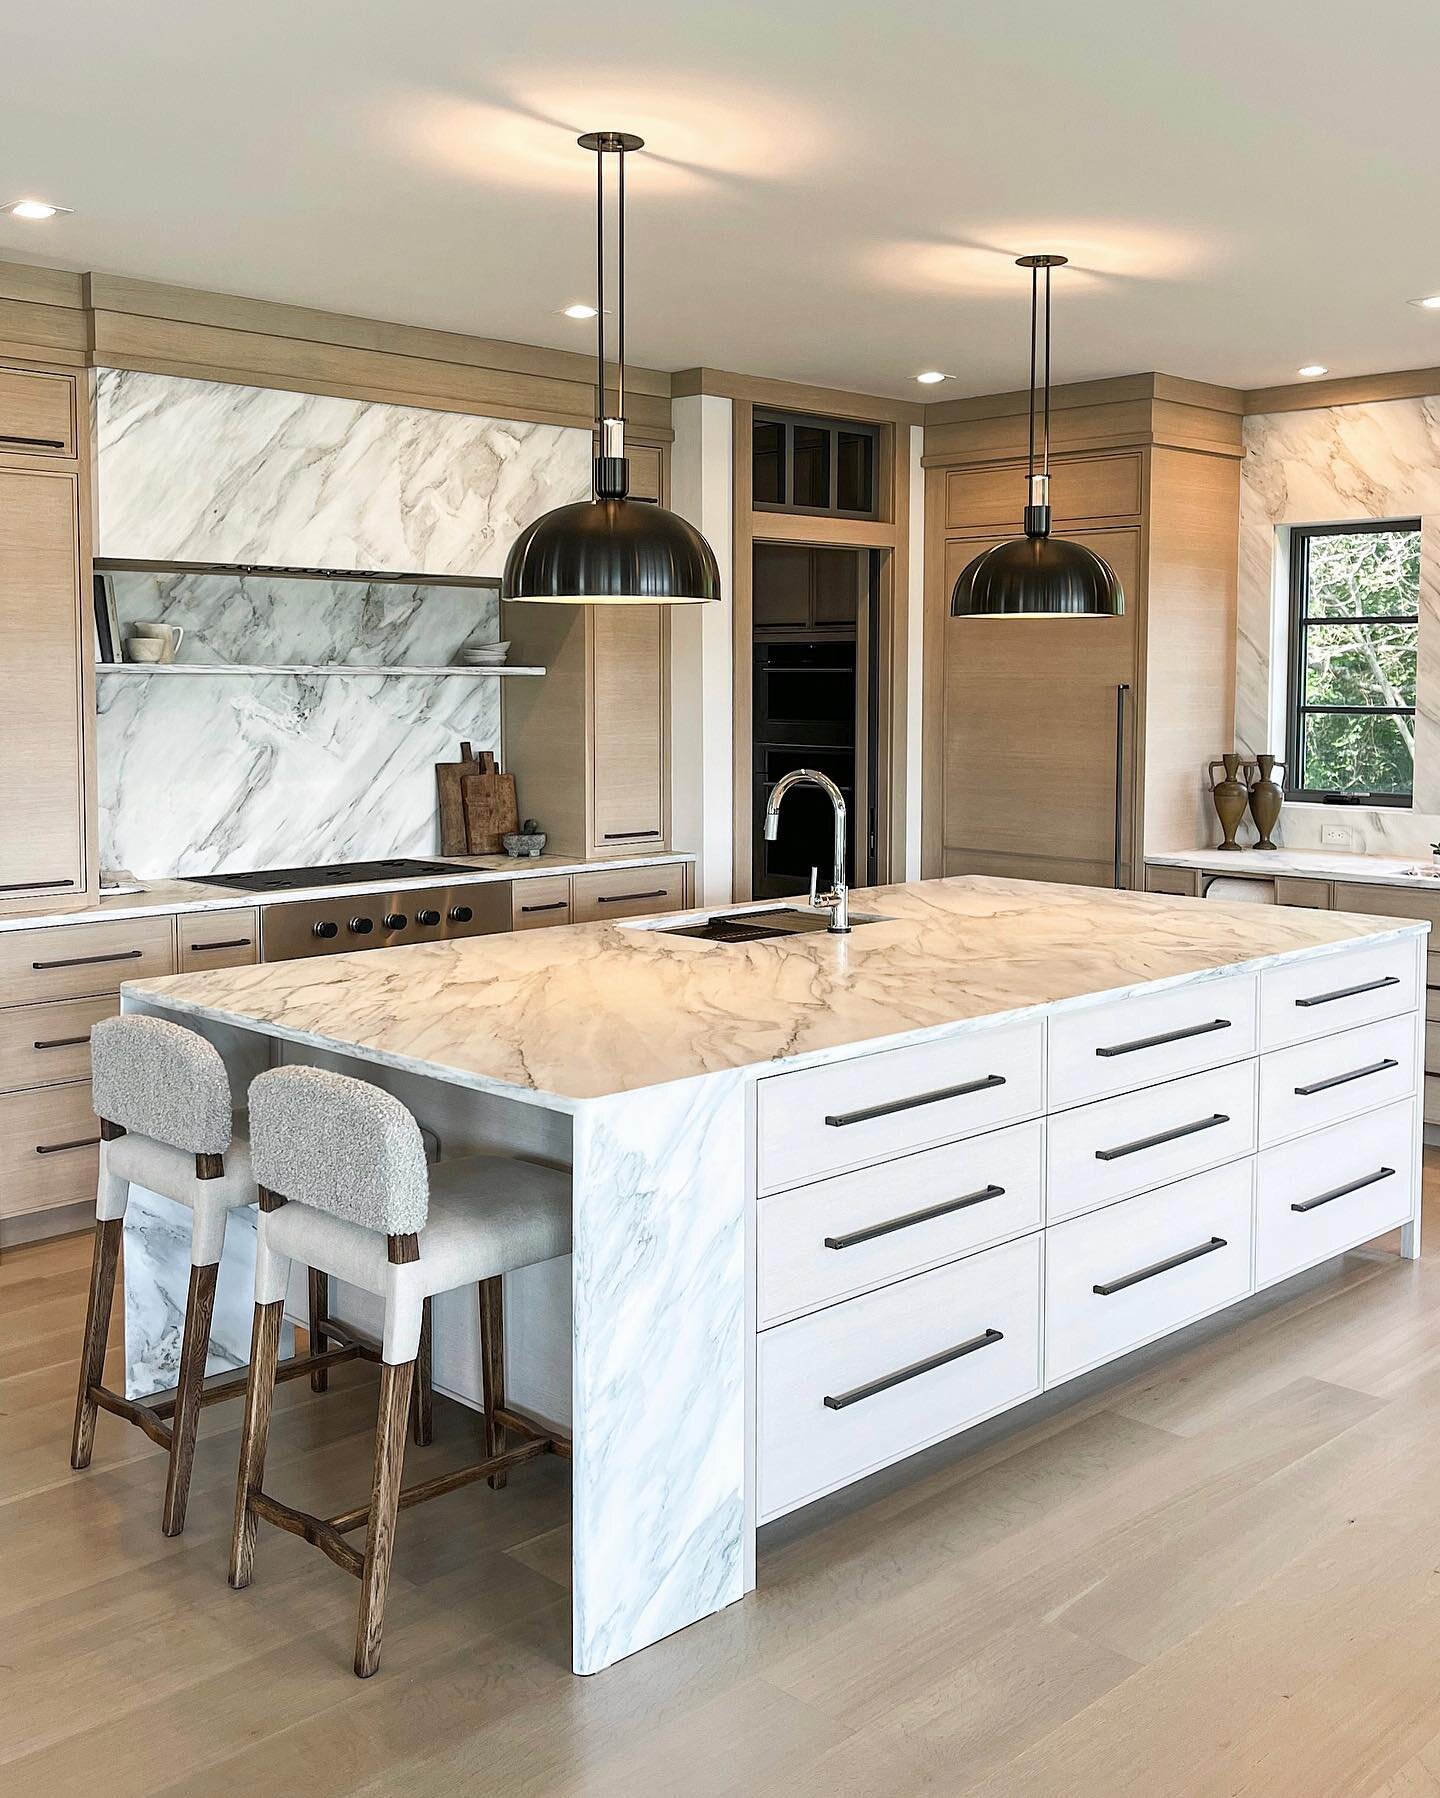 Happy Friday! Loved working with the client on the many iterations of this kitchen island. The goal was to maximize storage without sacrificing style. What do you think?? 

Team: @kandrconstruction_ri @dimauroarchitects @moorehousedesign @jutraswoodw